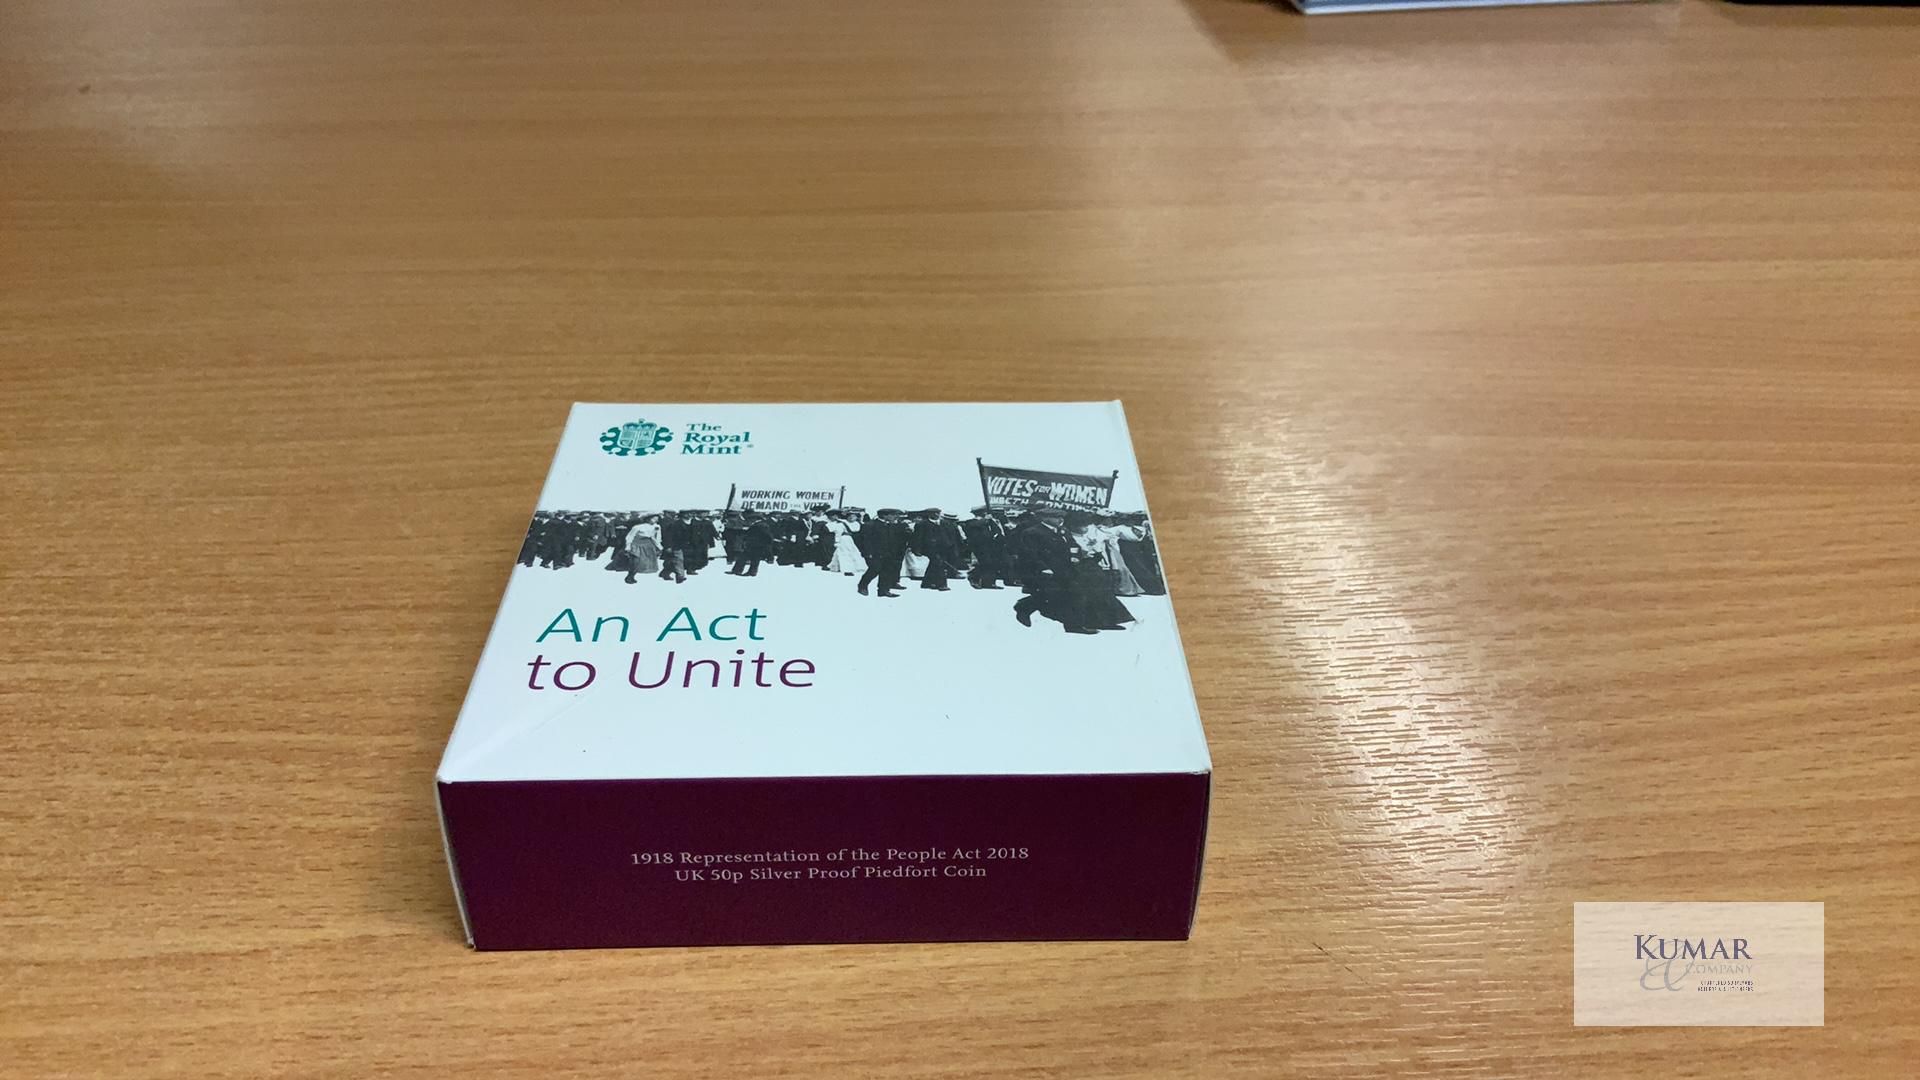 The Royal Mint Coin- An Act to Unite 1918 Representation of the People Act 2018 2018 UK 50p Silver